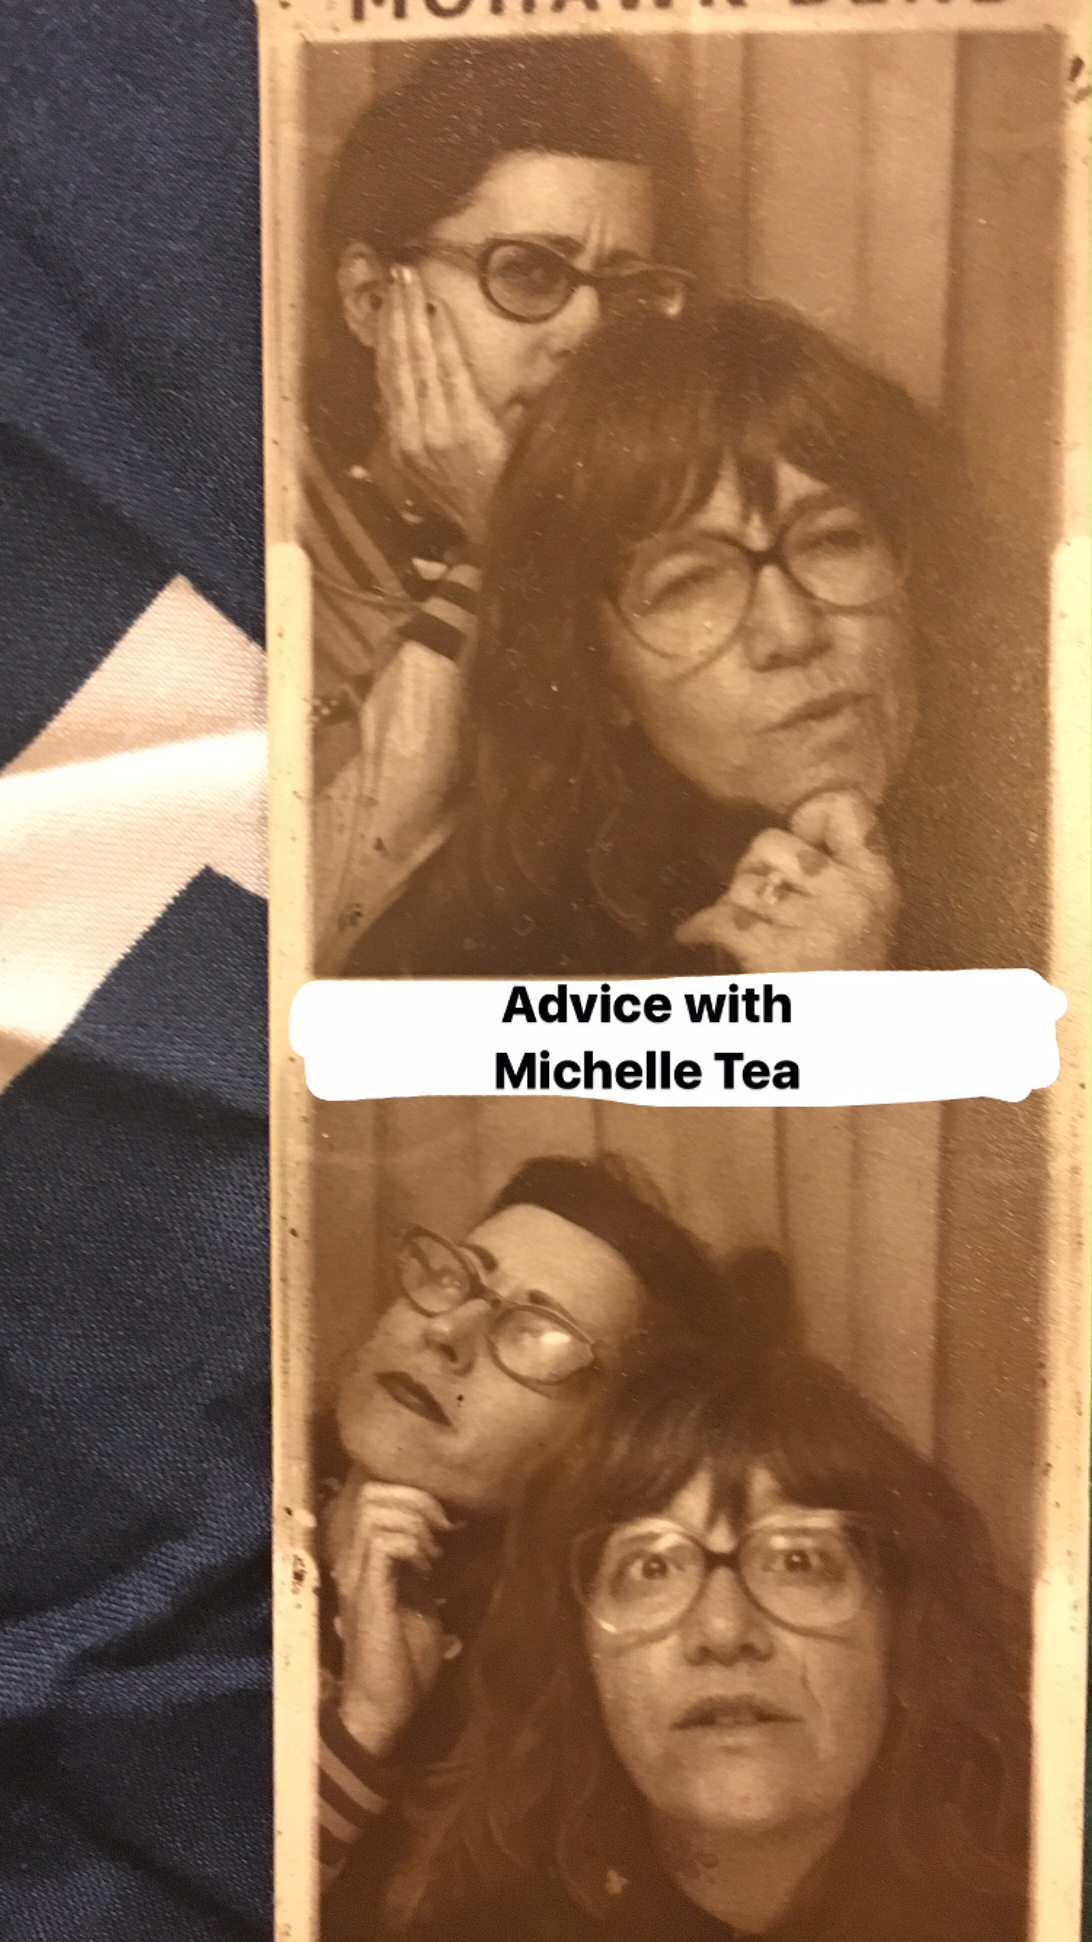 Episode #46-Michelle Tea gives advice on tokenism, sobriety, handjobs & post-election despair.